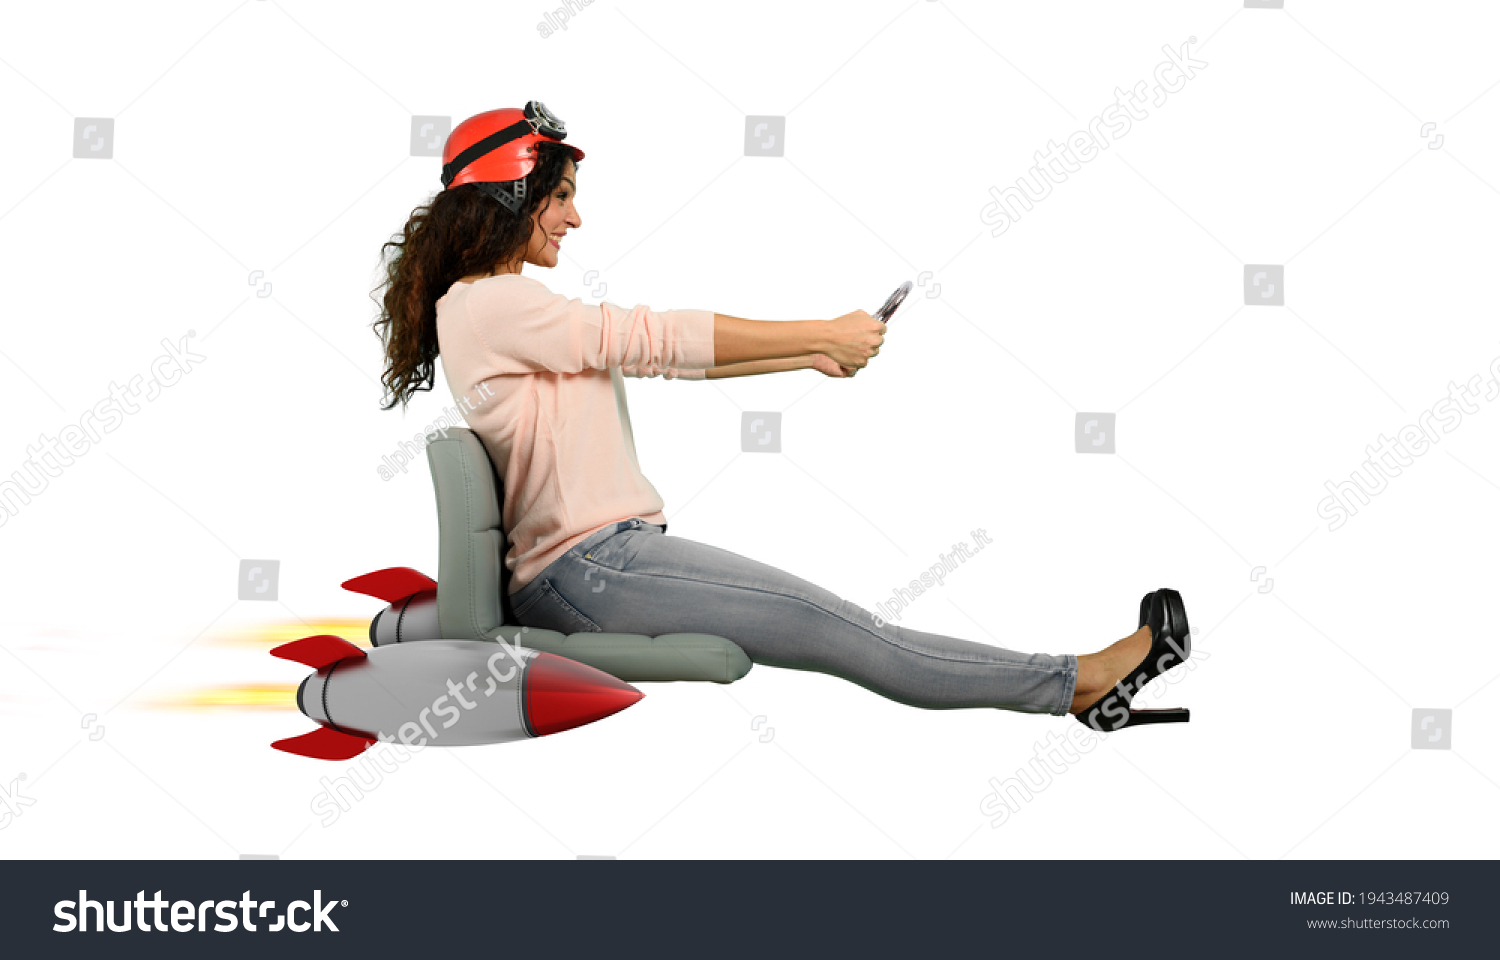 Woman drives fast with rockets under the chair. concept of having the turbo #1943487409